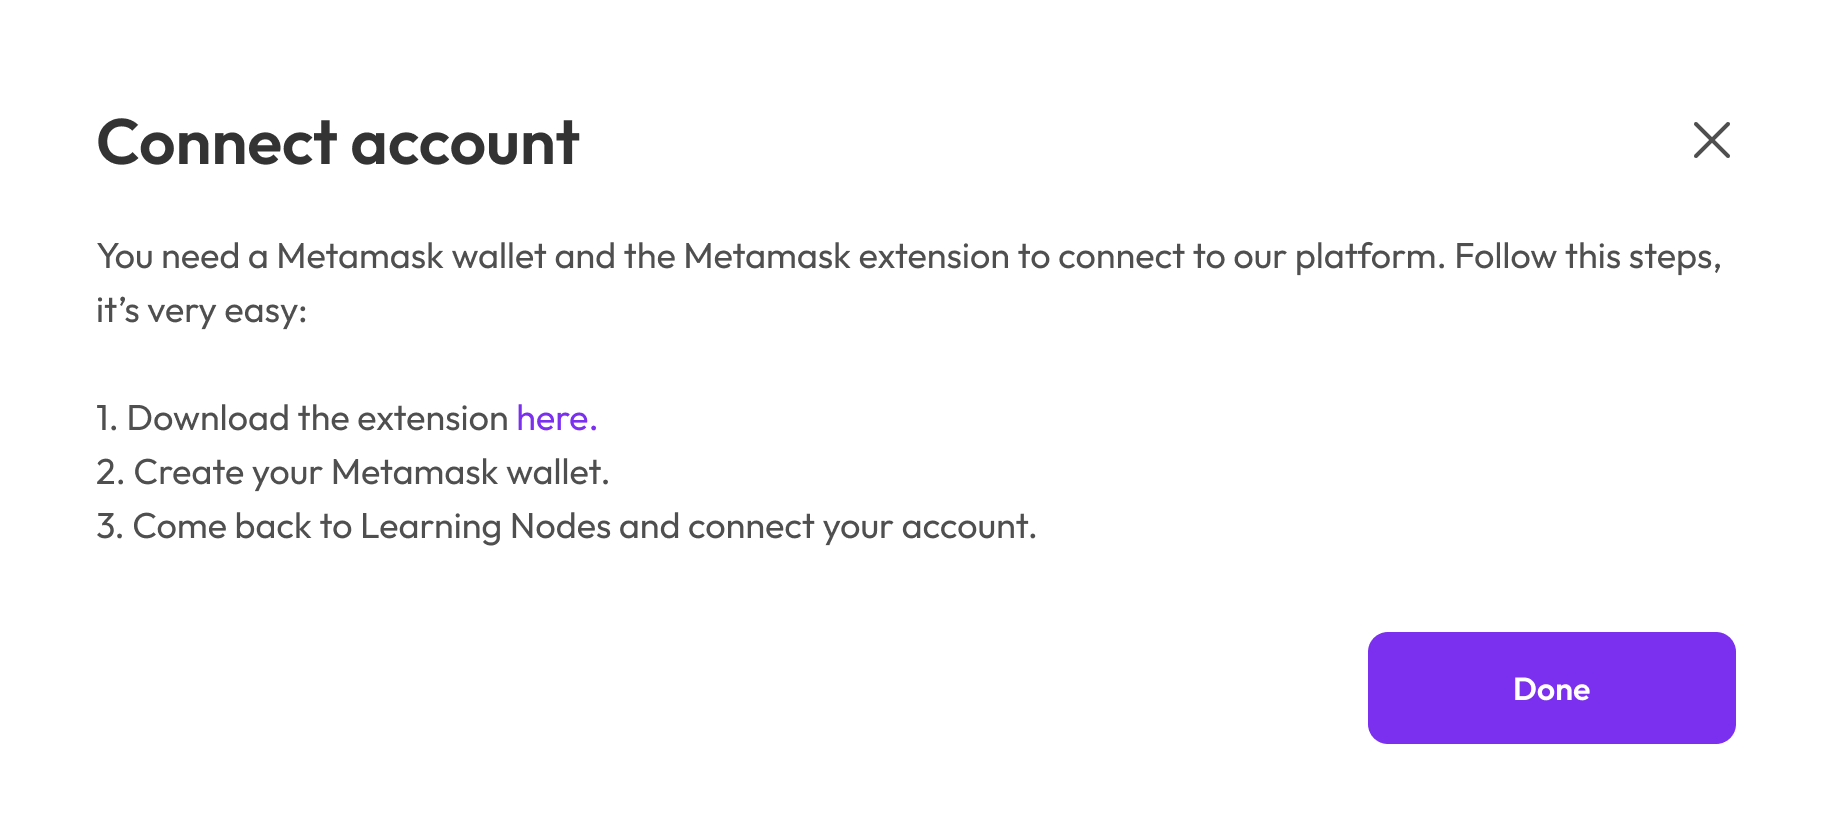 Connect your account modal